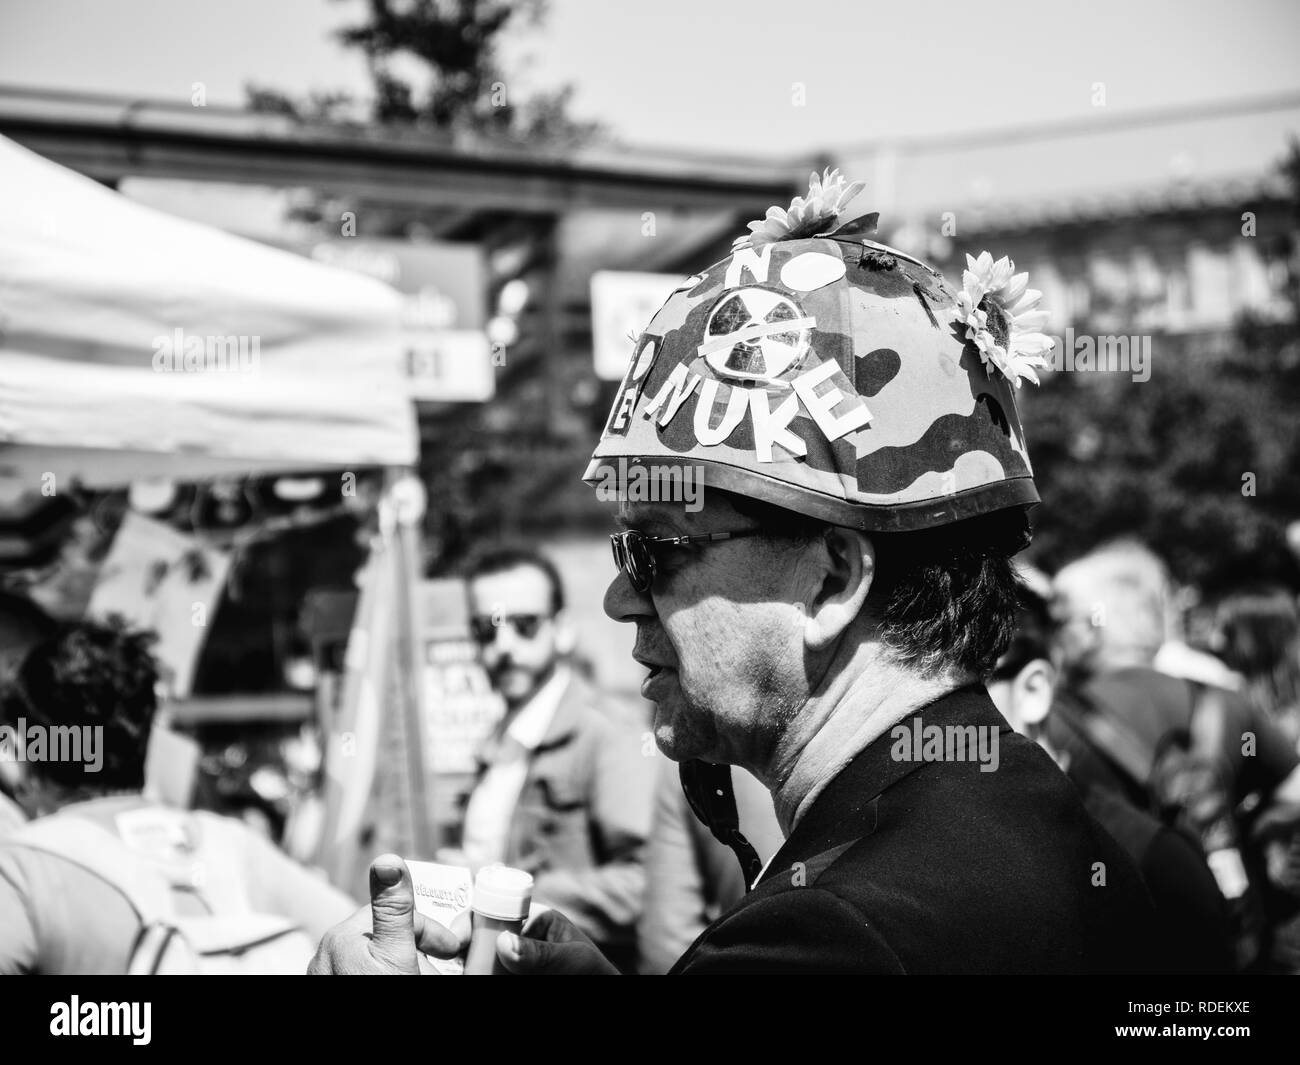 STRASBOURG, FRANCE - MAY 5, 2018: People making a party protest Fete a Macron party for Macron - man with military helmet with NO NUKE text and flowers Stock Photo